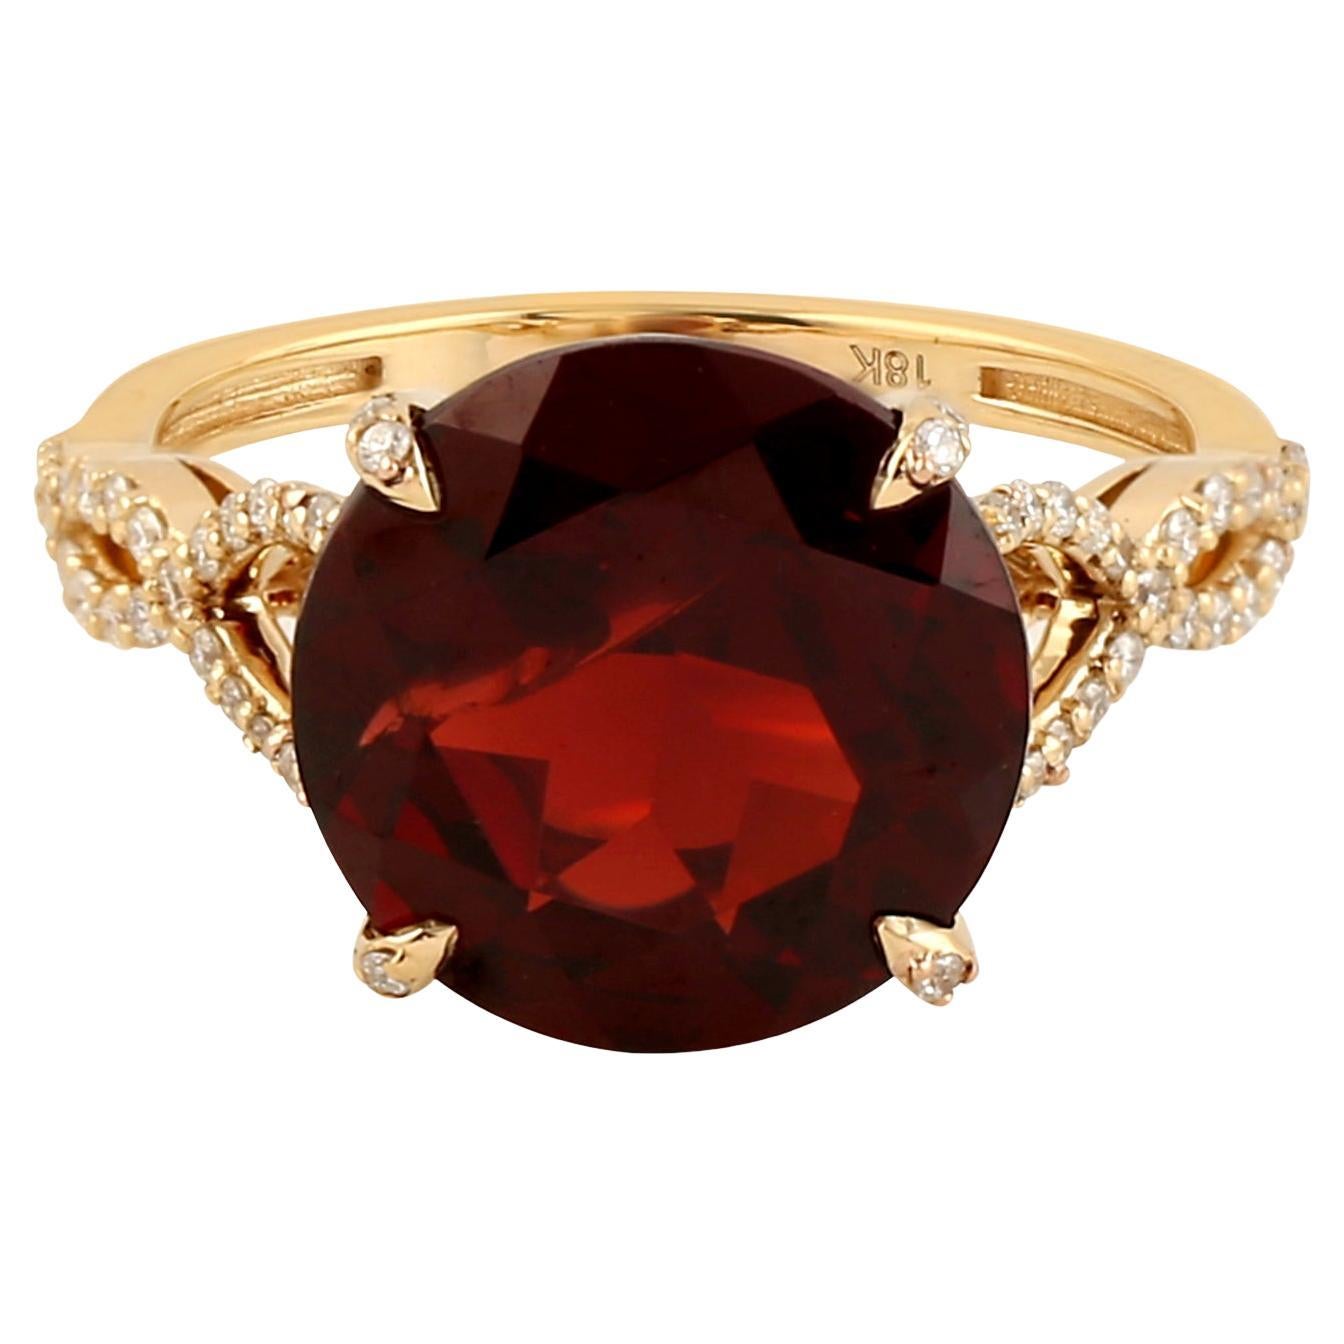 7.44 Ct Garnet Cocktail Ring With Diamonds Made In 18k yellow Gold For Sale